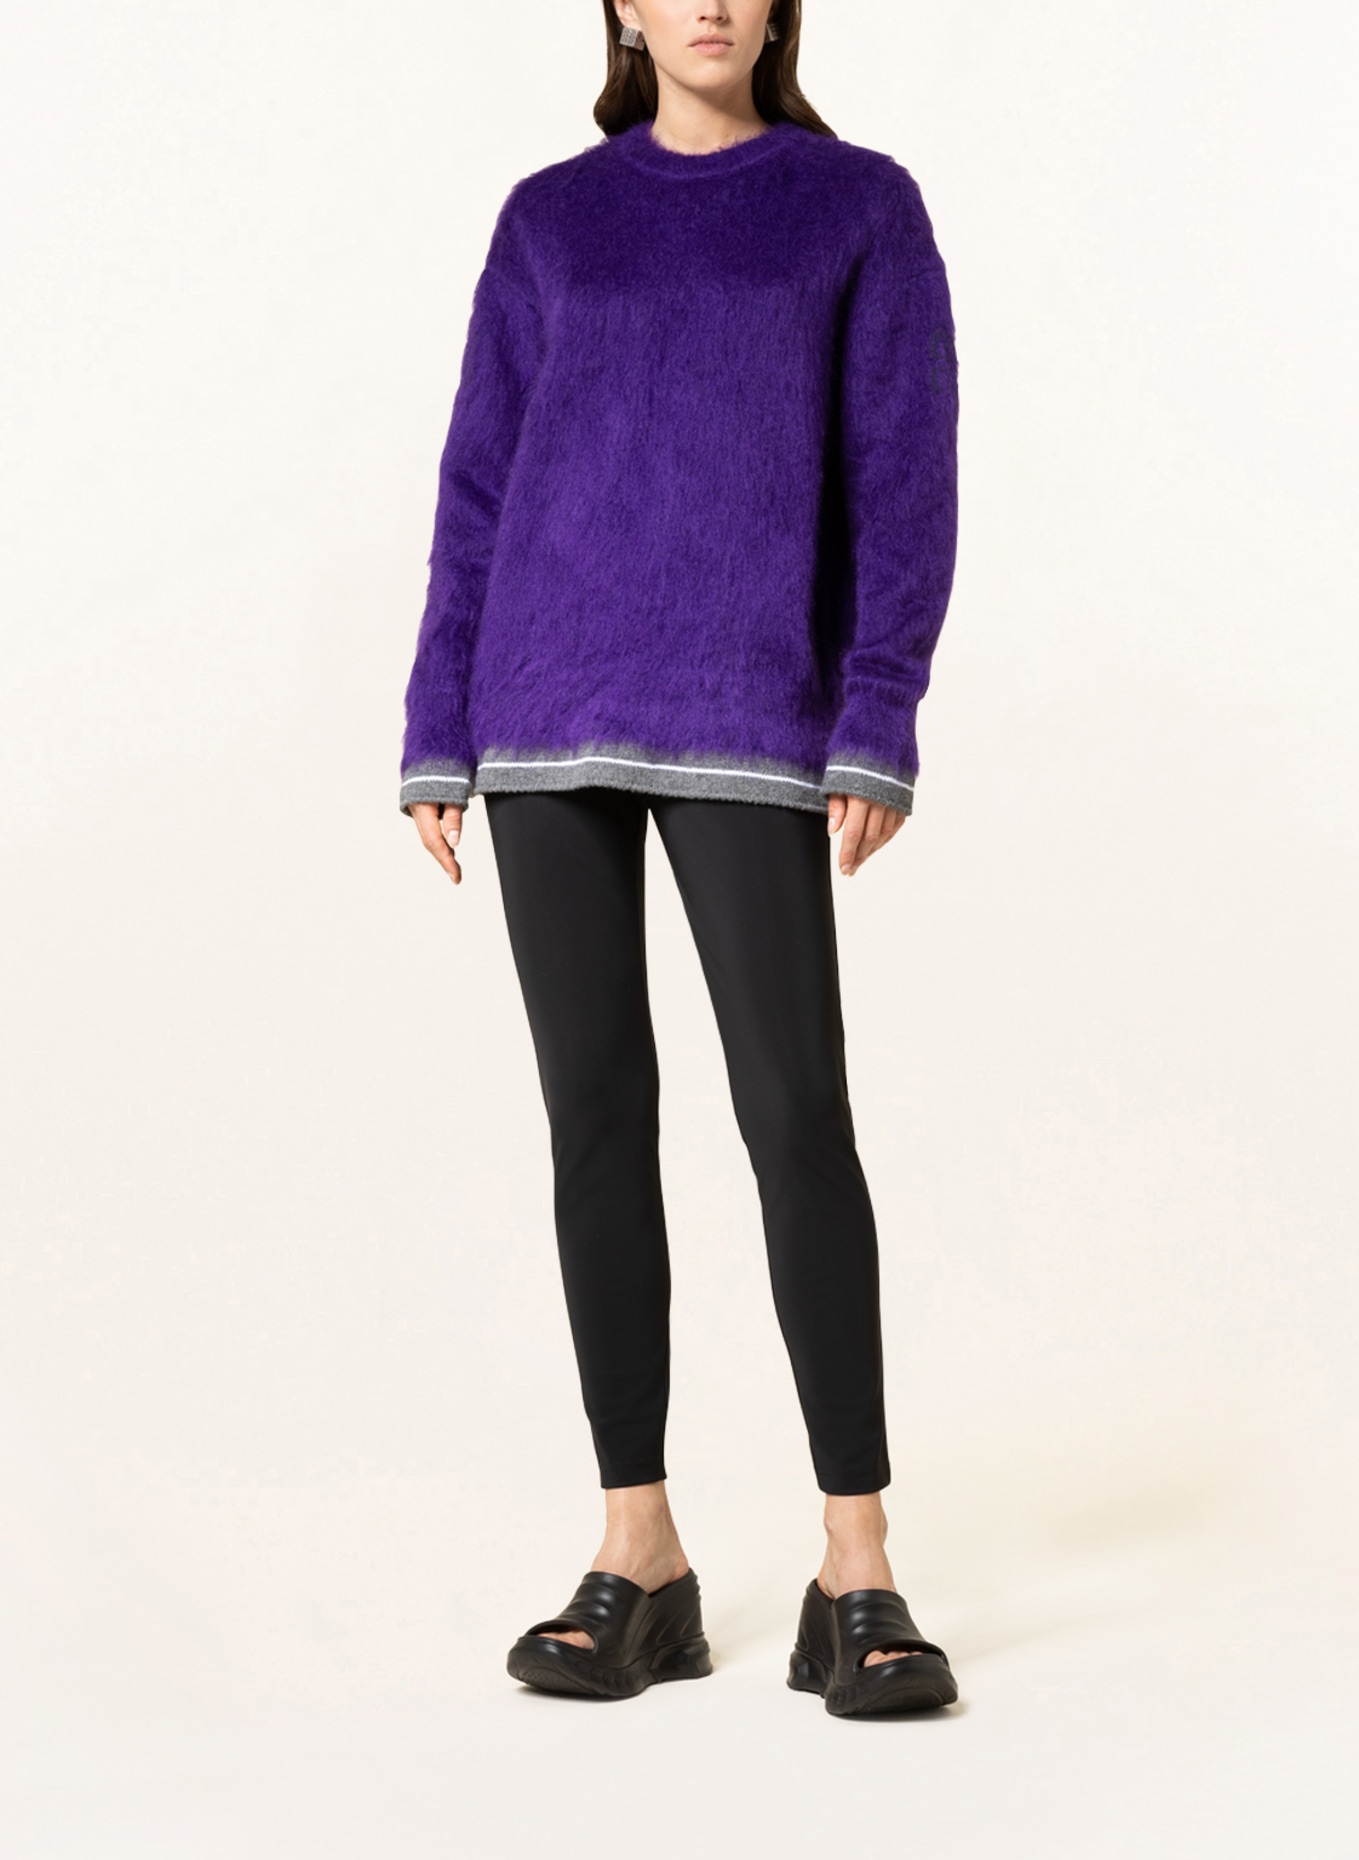 GIVENCHY Oversized-Pullover mit Mohair , Farbe: LILA (Bild 2)